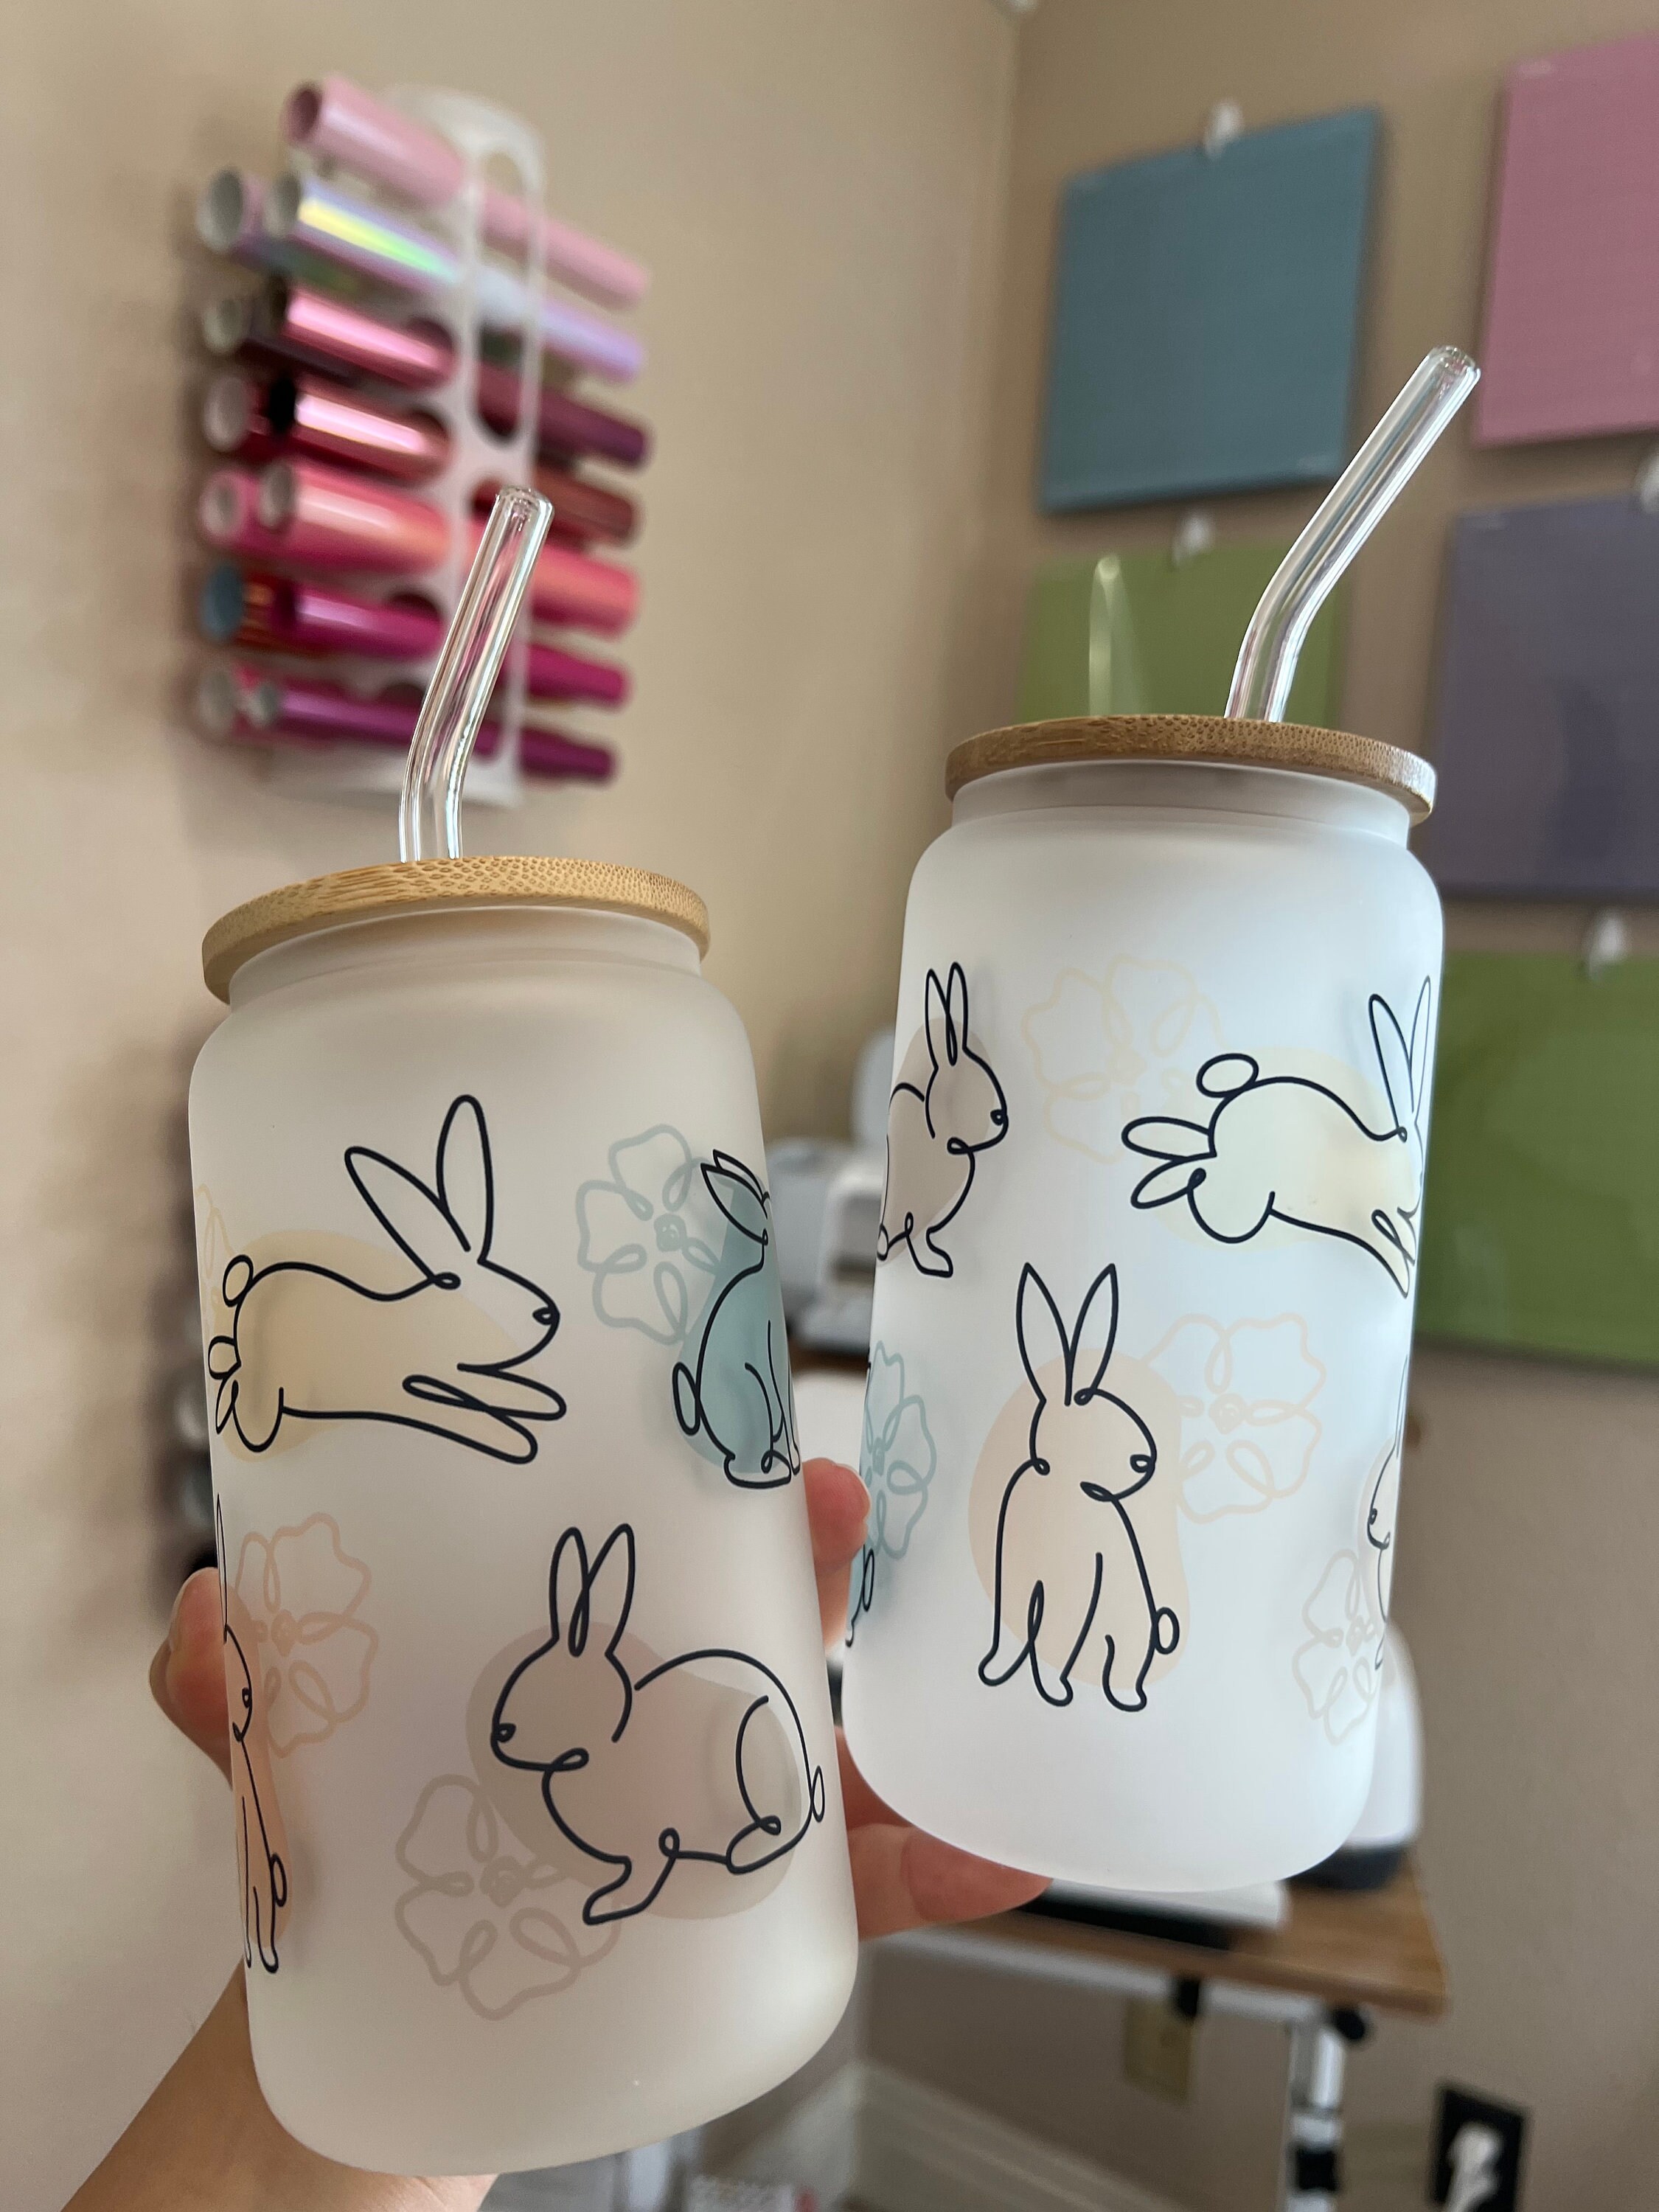 CGT Easter Plastic Sipper Tumblers with Lid and Straws Spring Cups